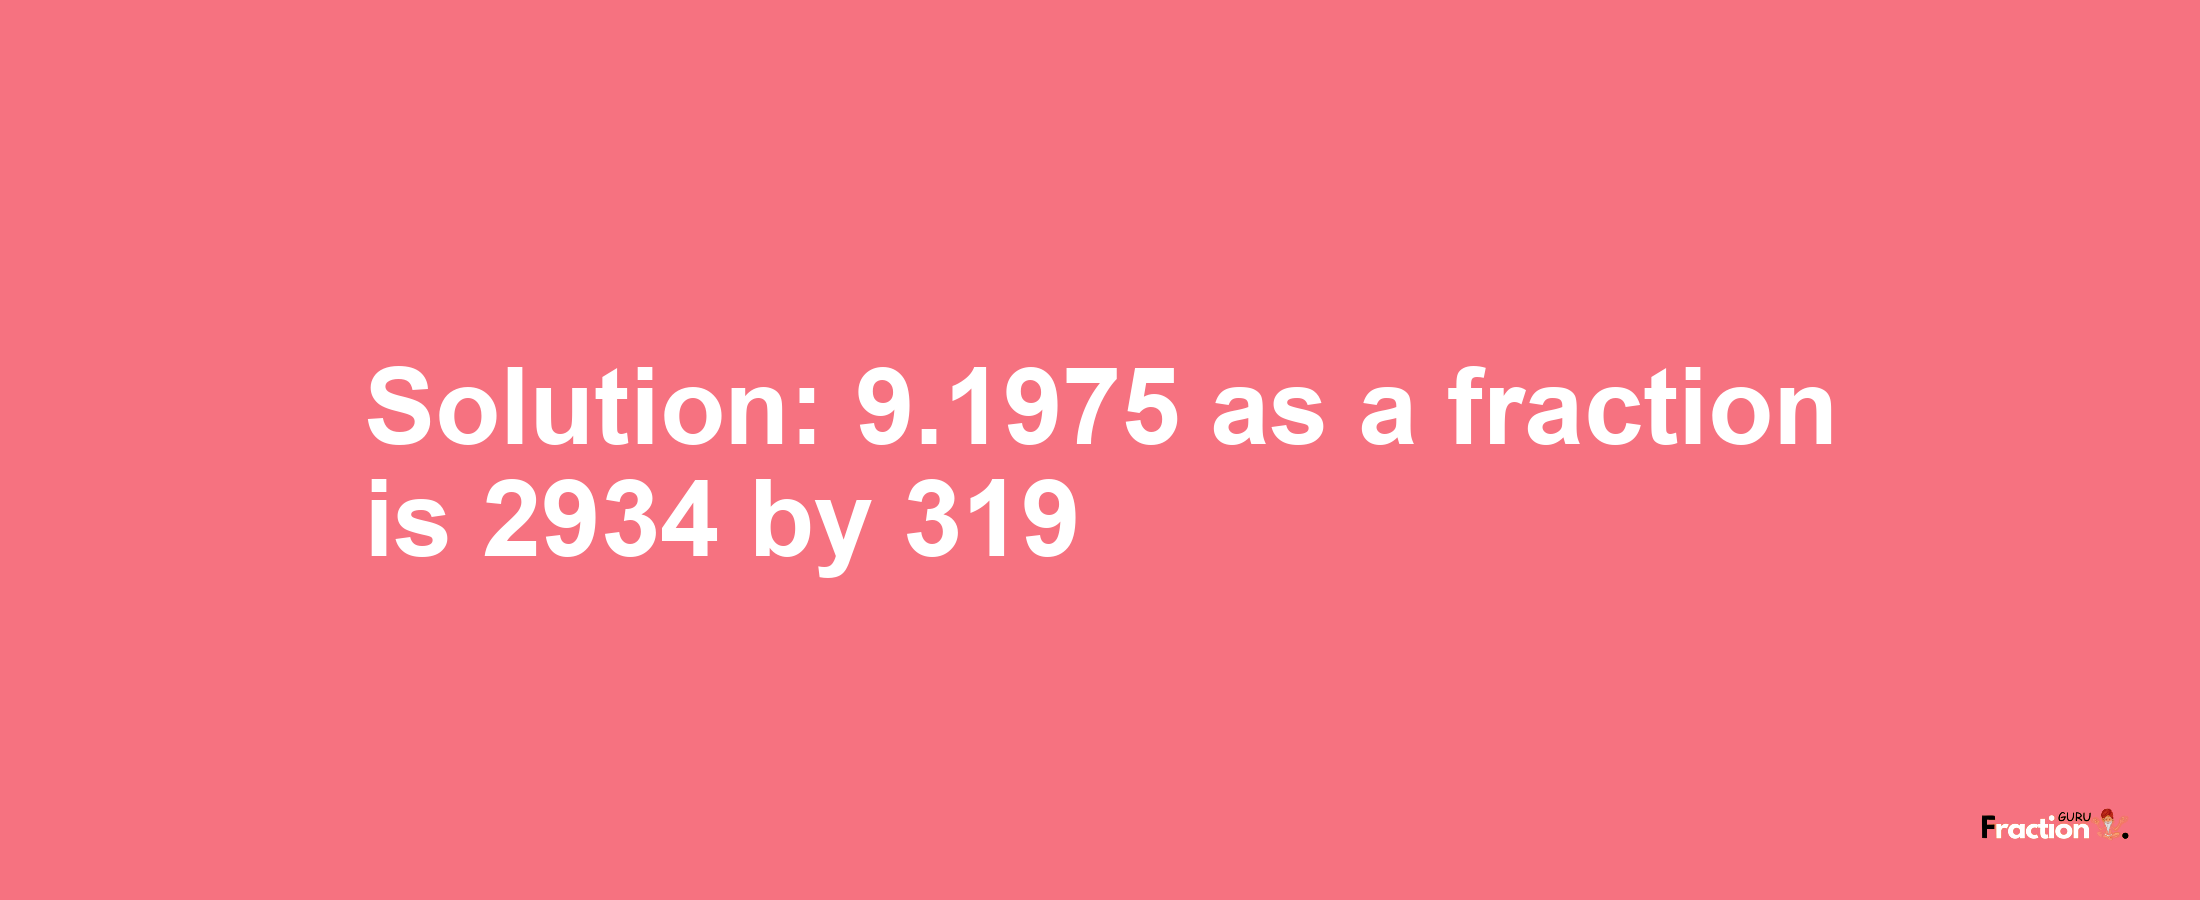 Solution:9.1975 as a fraction is 2934/319